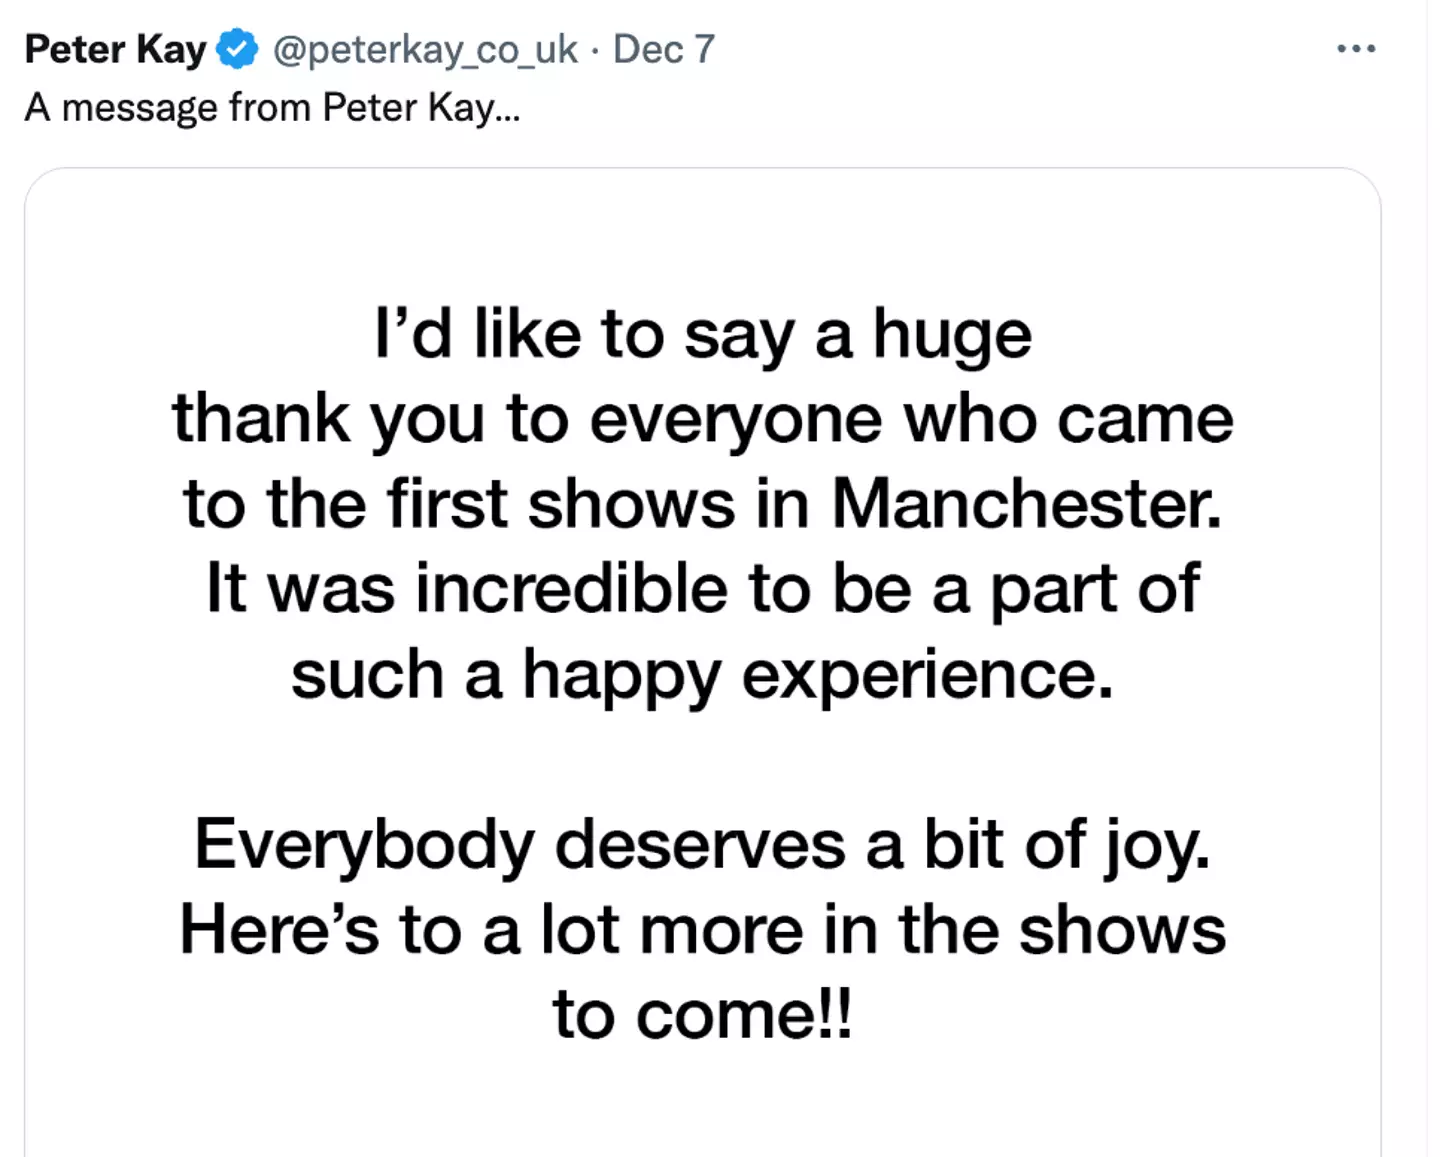 Kay said 'everyone deserves a bit of joy' as he announced his shows.